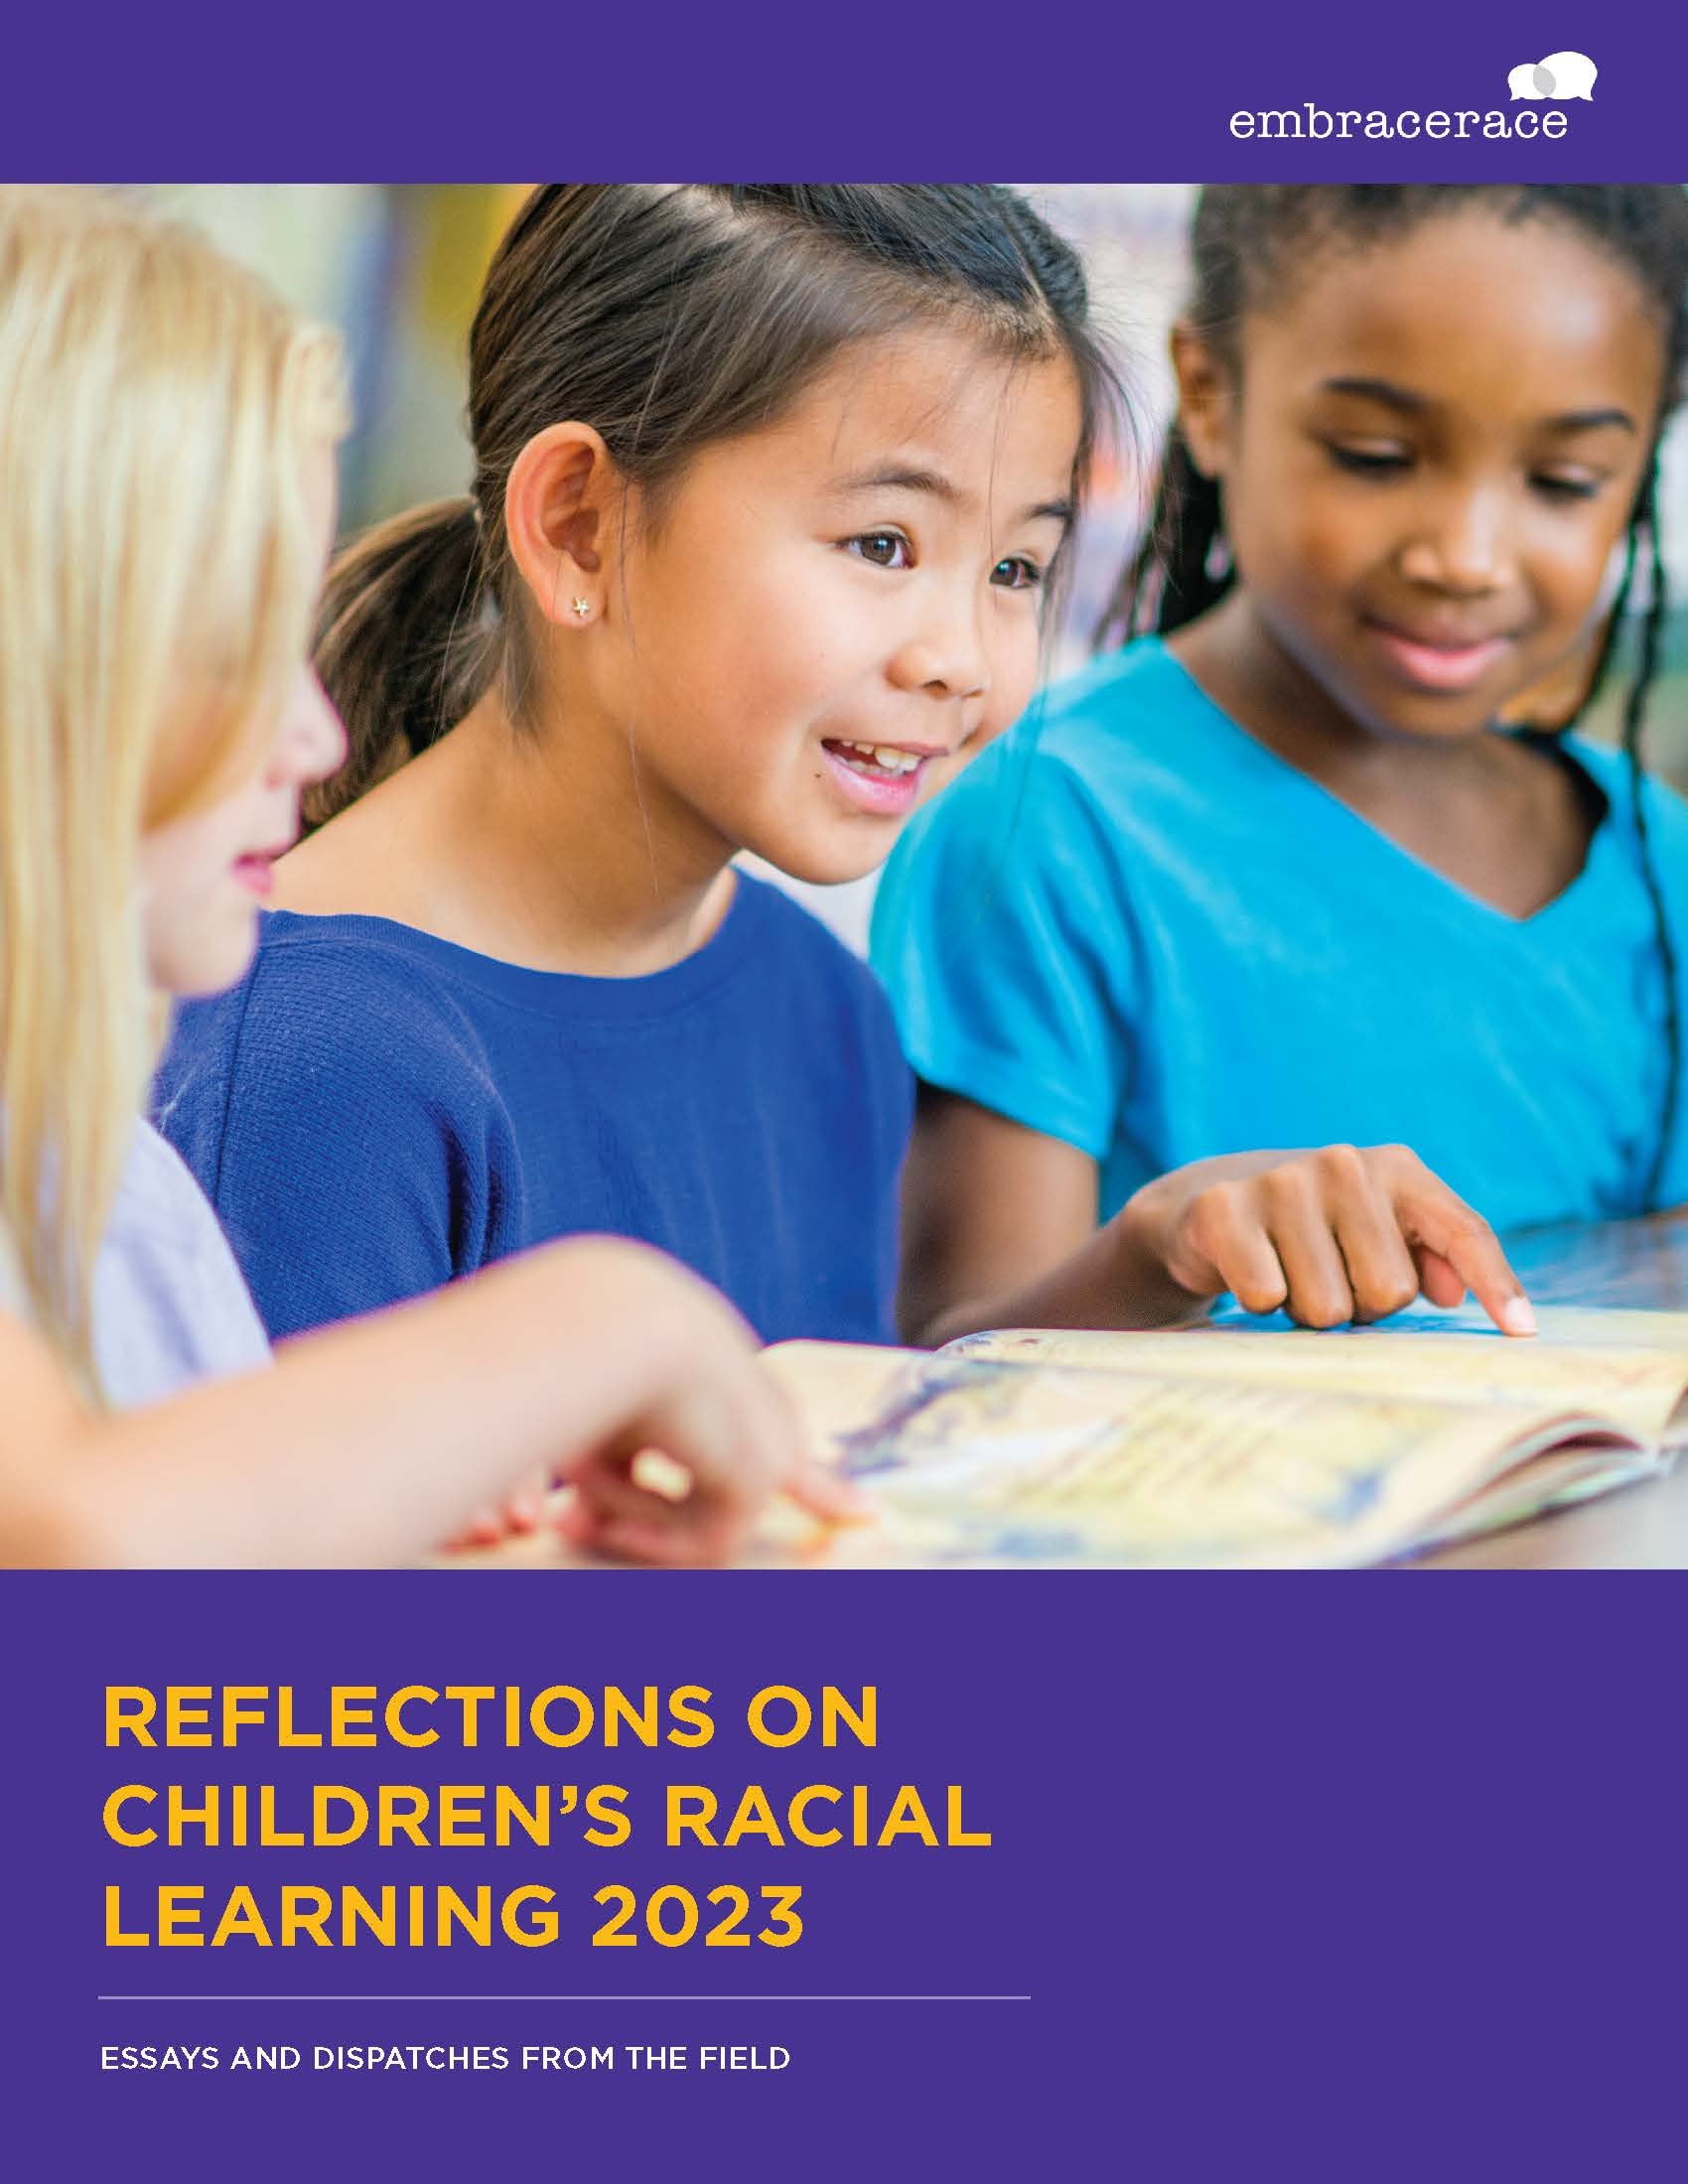 Children's Racial Learning Embrace Race Reflections_Page_01.jpg